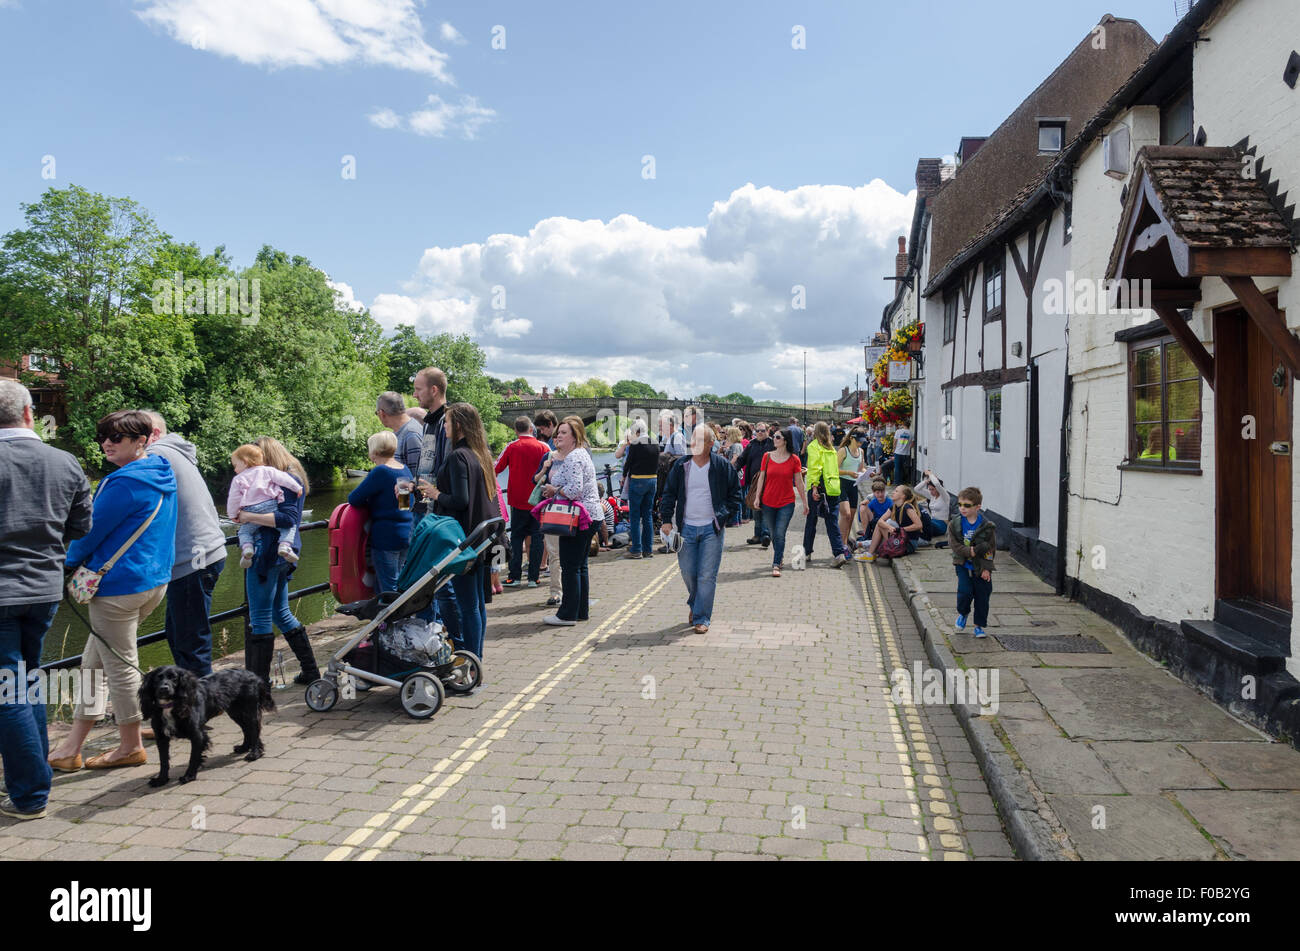 Visitors on the banks of the River Severn in the Worcestershire town of Bewdley watching the rowing regatta Stock Photo